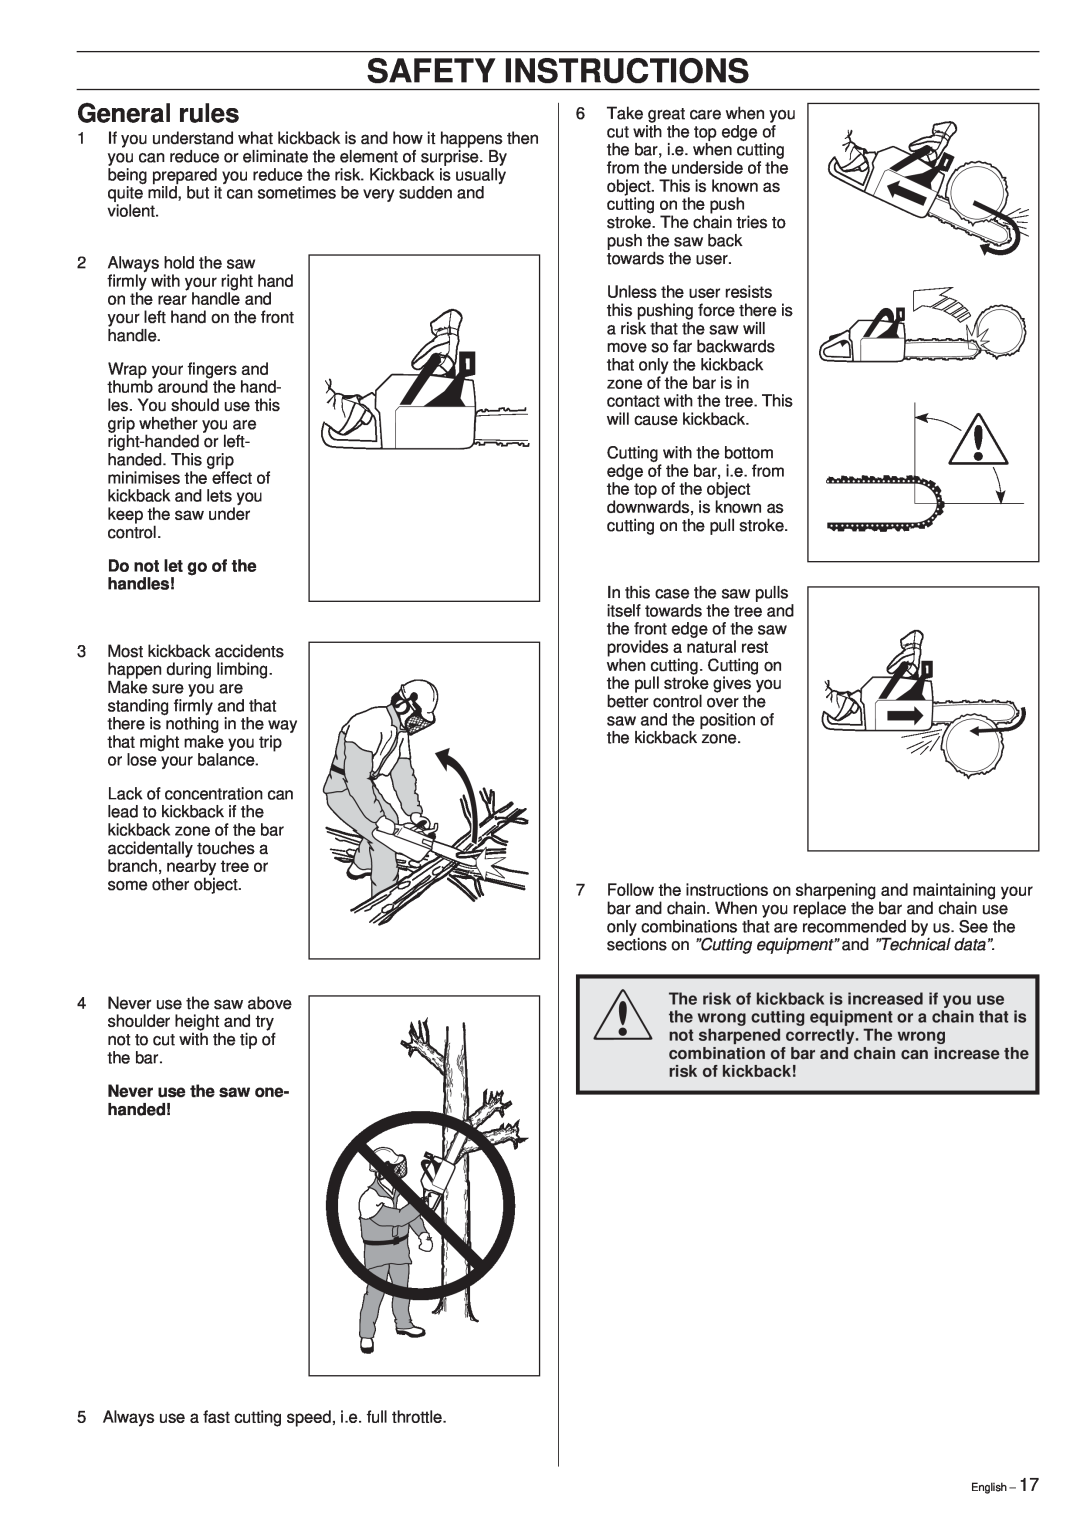 Husqvarna 394XP manual Safety Instructions, General rules, Do not let go of the handles, Never use the saw one- handed 